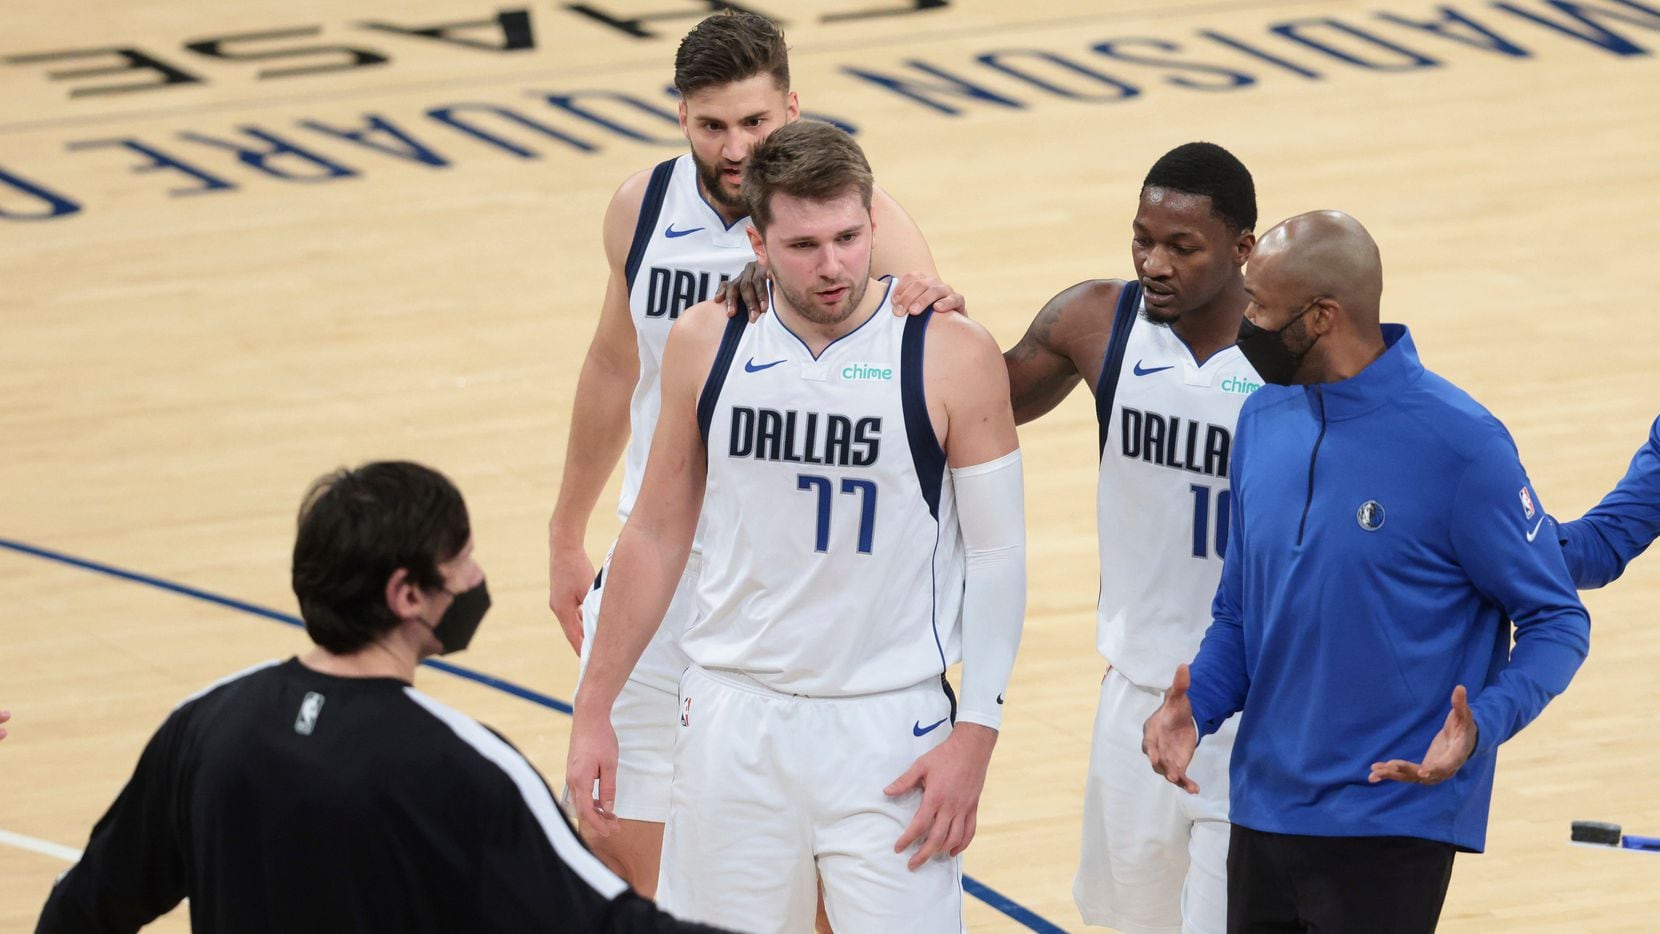 Dallas Mavericks guard Luka Doncic (77) talks with assistant coach Jamahl Mosley and teammates during the second half against the New York Knicks in an NBA basketball game Friday, April 2, 2021, in New York.